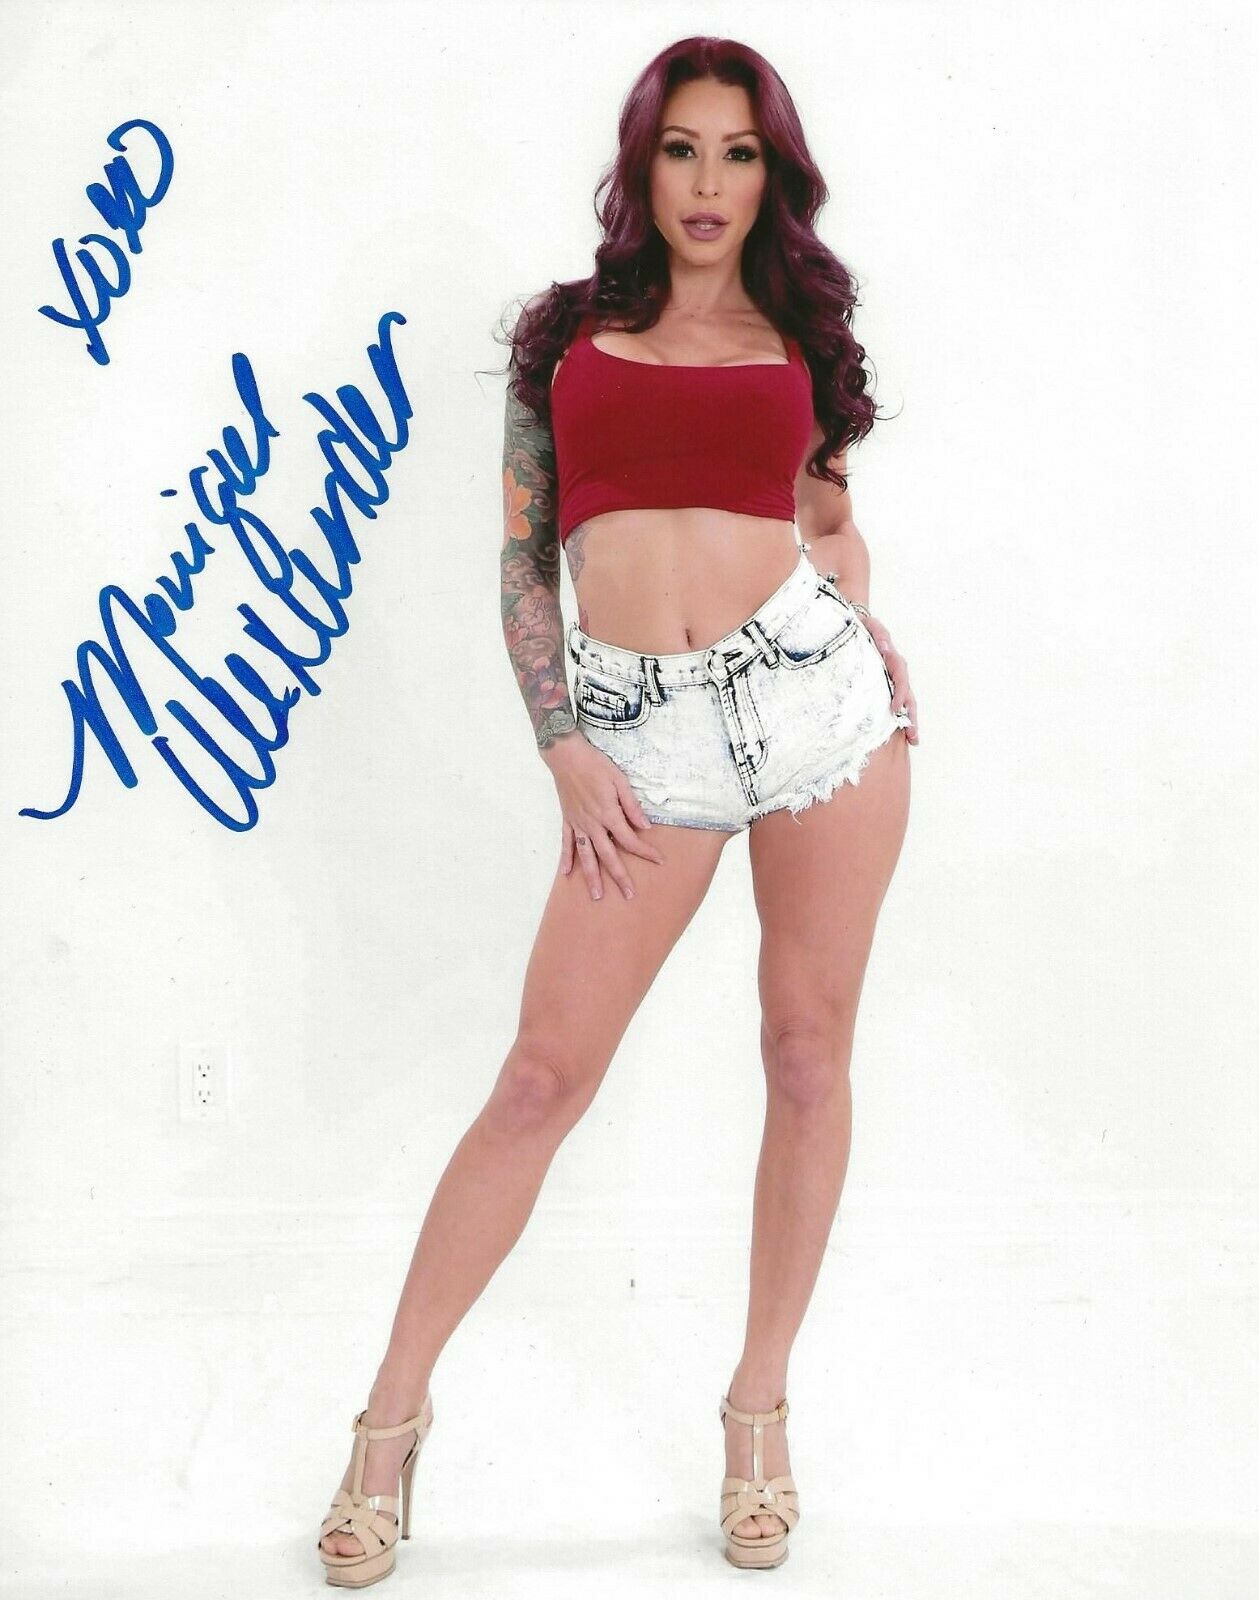 Monique Alexander Adult Video Star Signed 8x10 Photo Avn Winner Autographed 7 Collectible